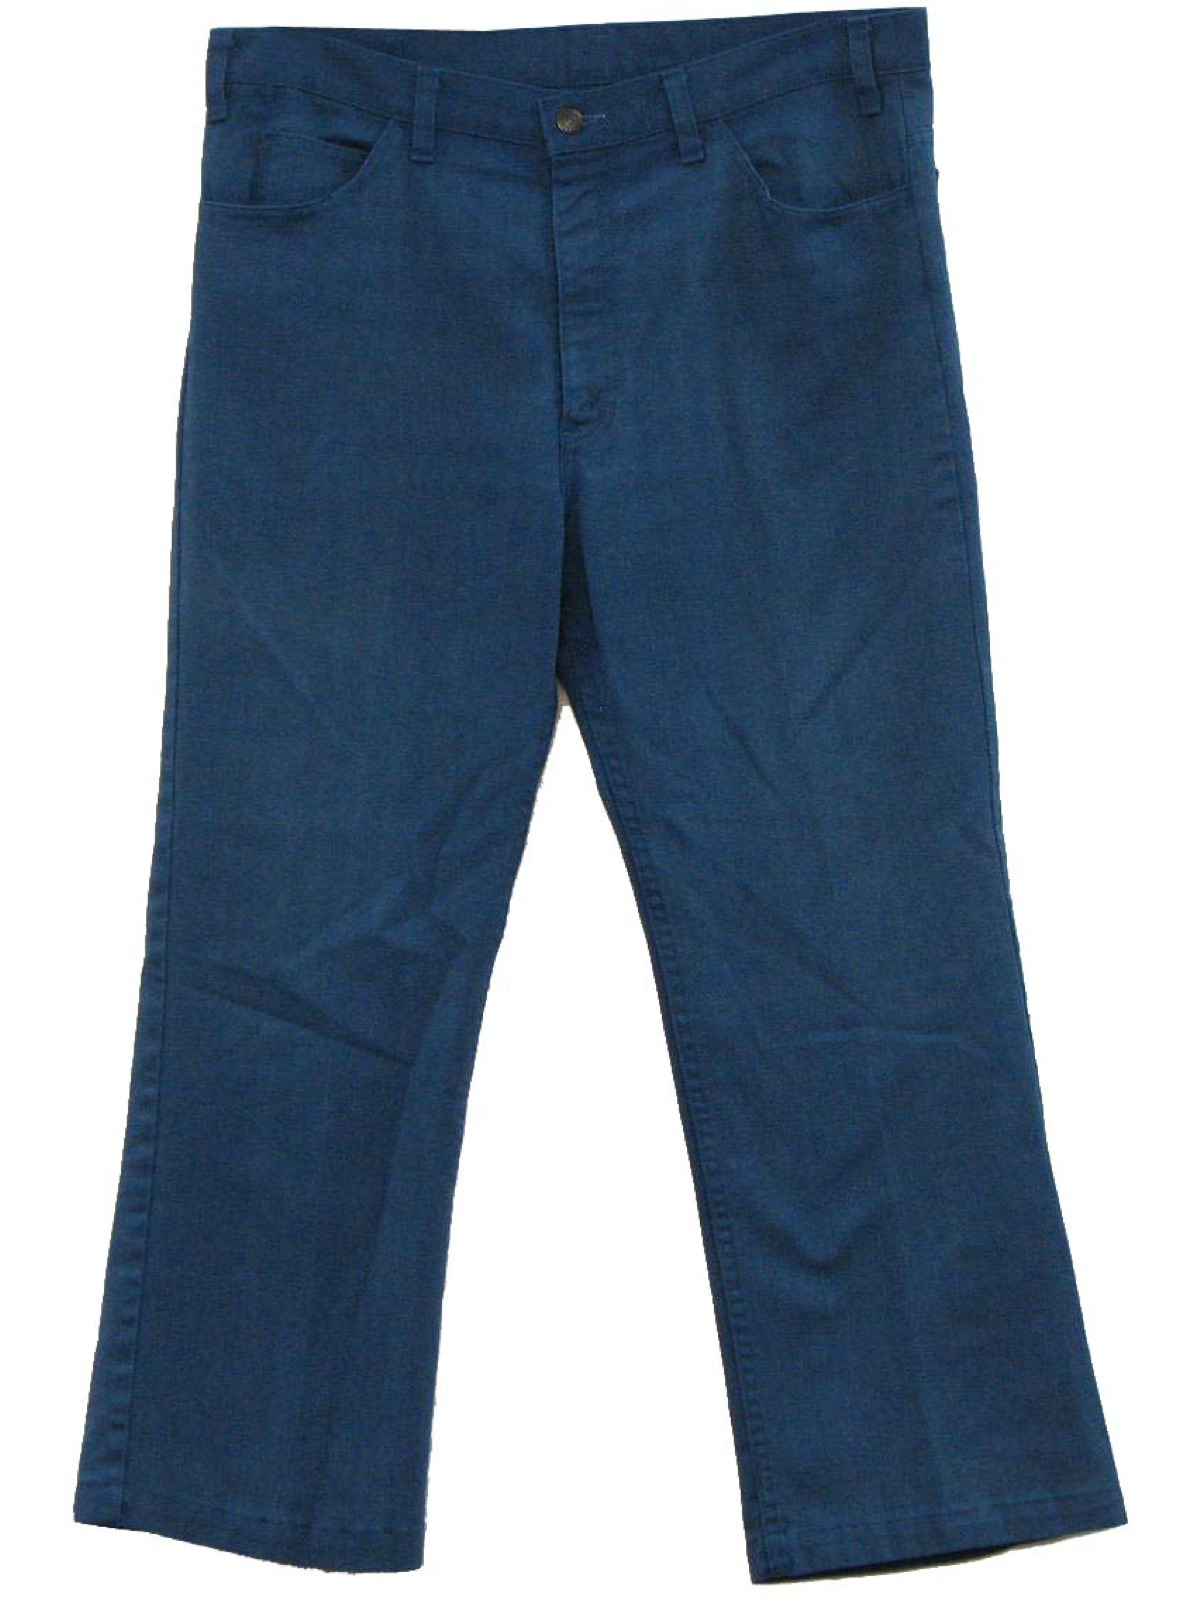 Vintage Levis Sta Prest 70's Flared Pants / Flares: Early 70s -Levis ...